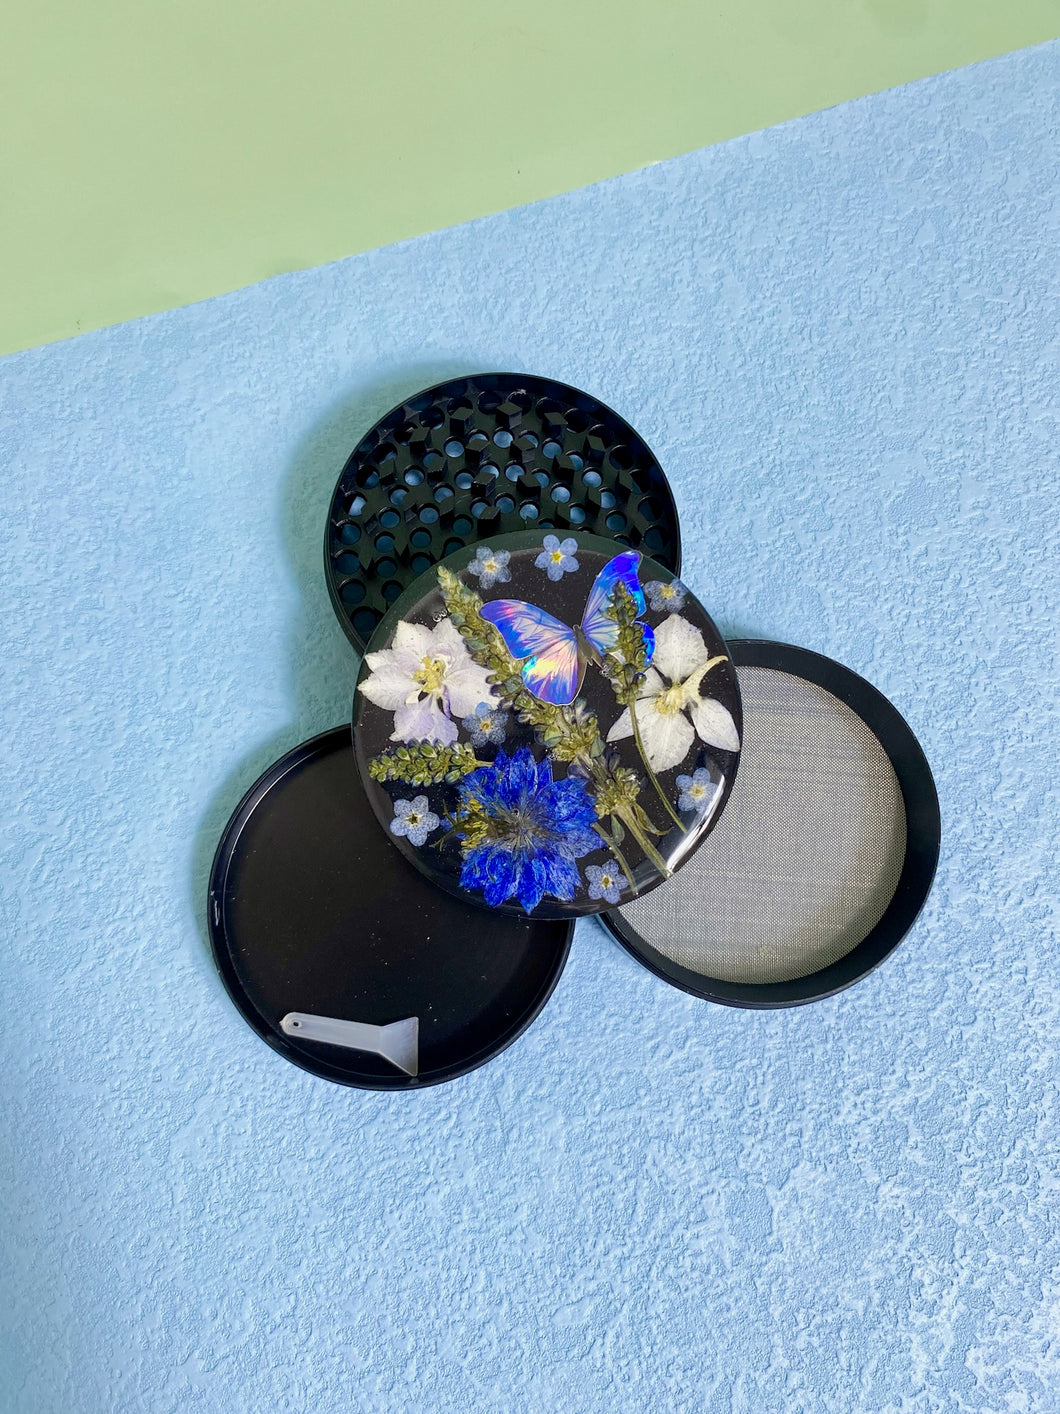 flower grinder with blue flowers and butterfly